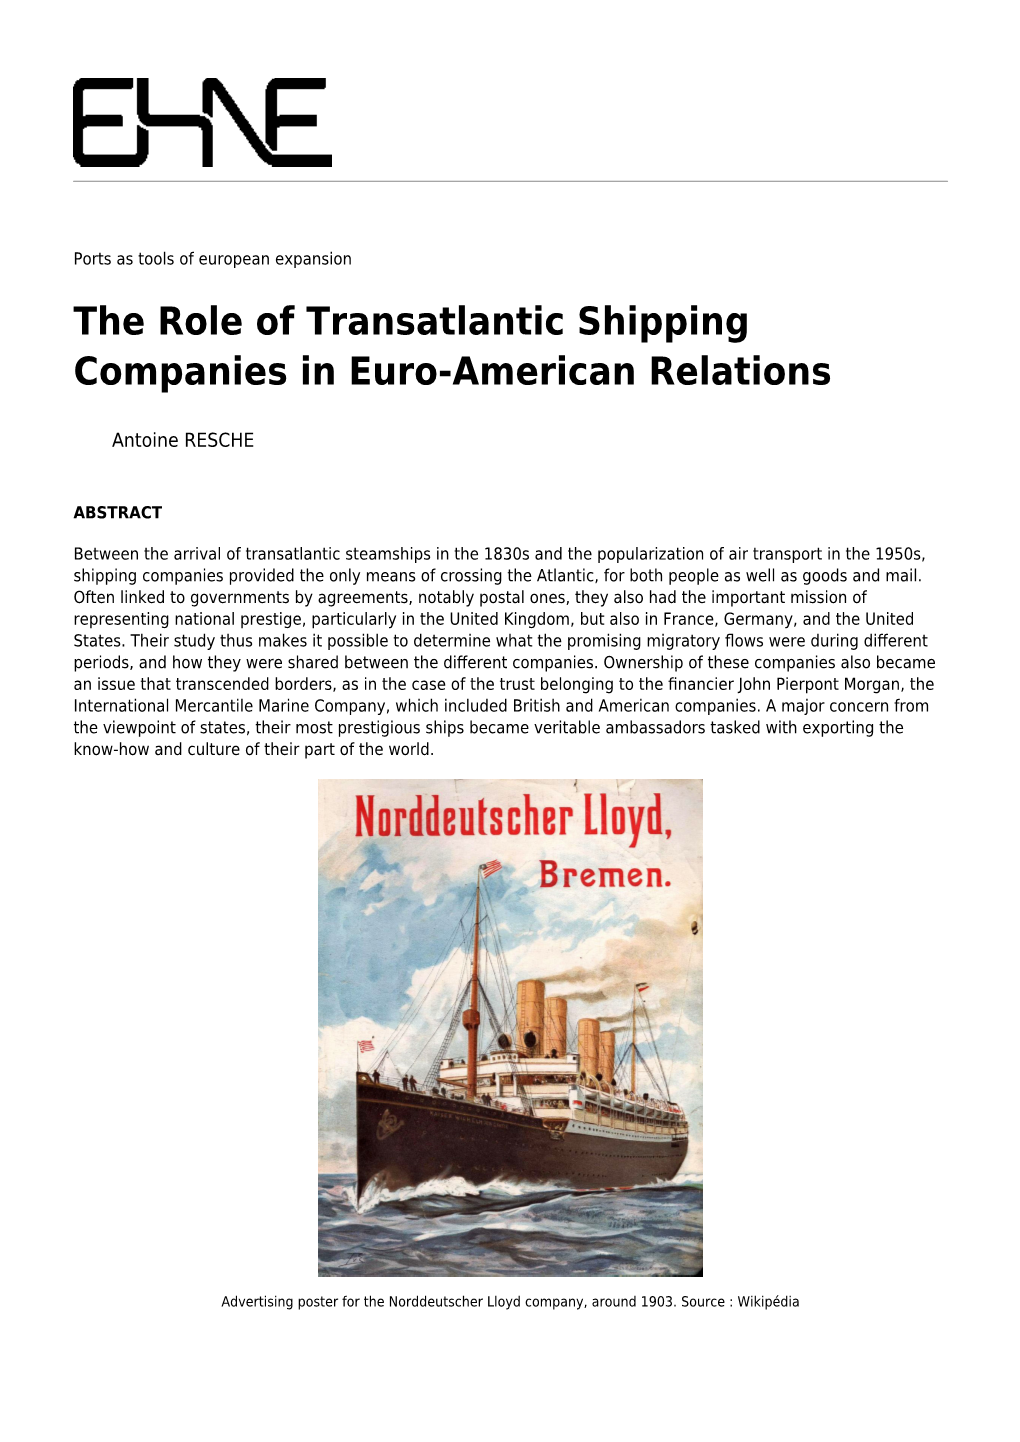 The Role of Transatlantic Shipping Companies in Euro-American Relations